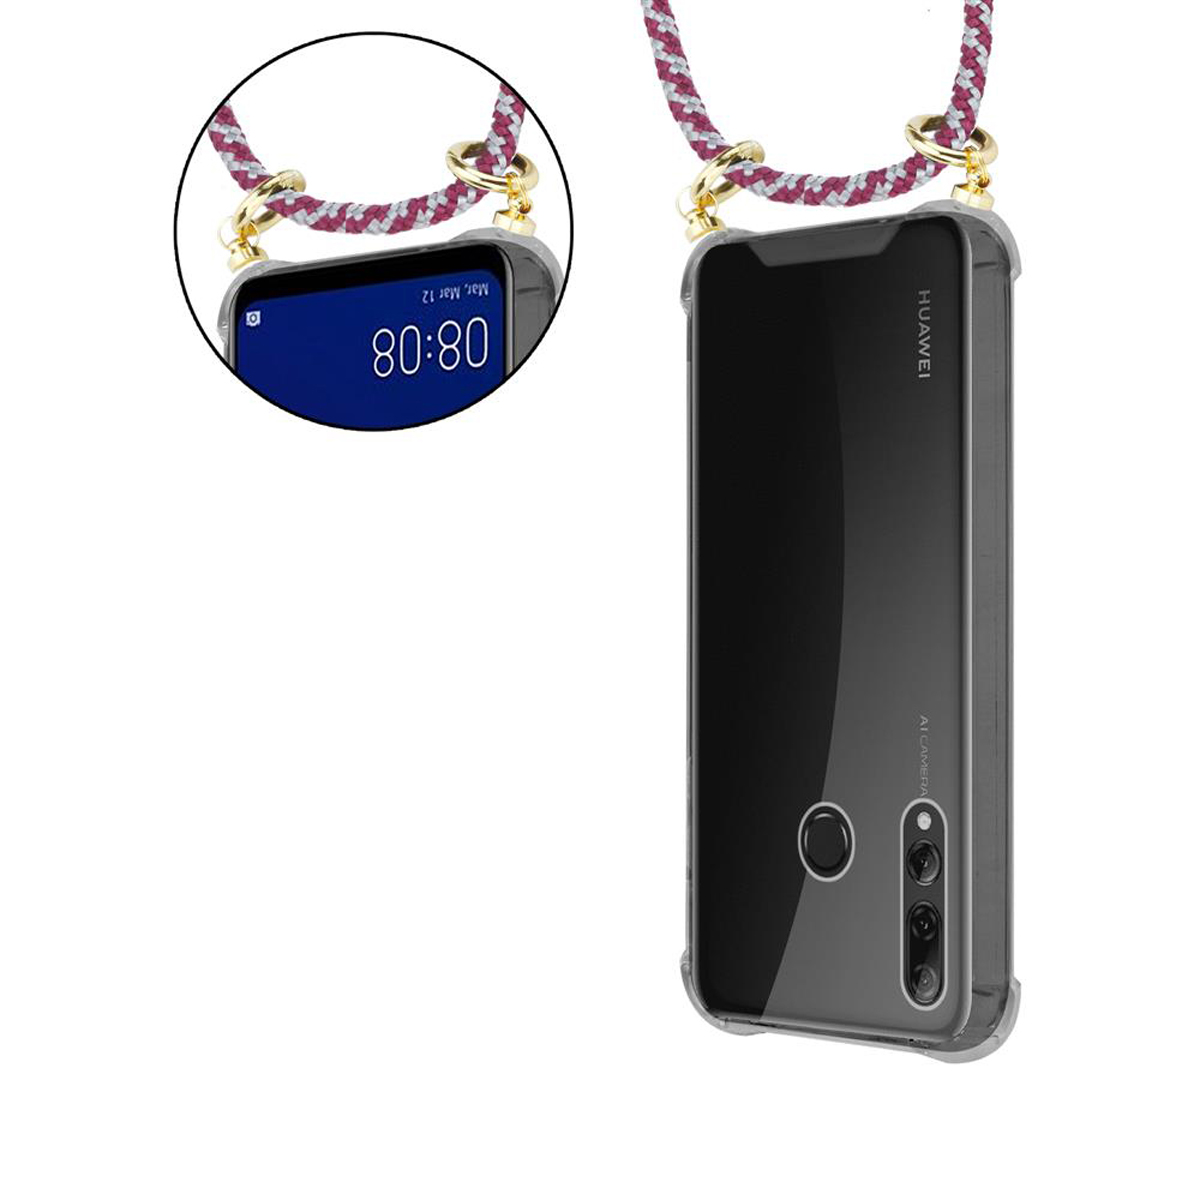 Backcover, Hülle, Gold ROT PLUS abnehmbarer Band mit 2019, Kordel WEIß P CADORABO Ringen, Kette SMART Huawei, und Handy